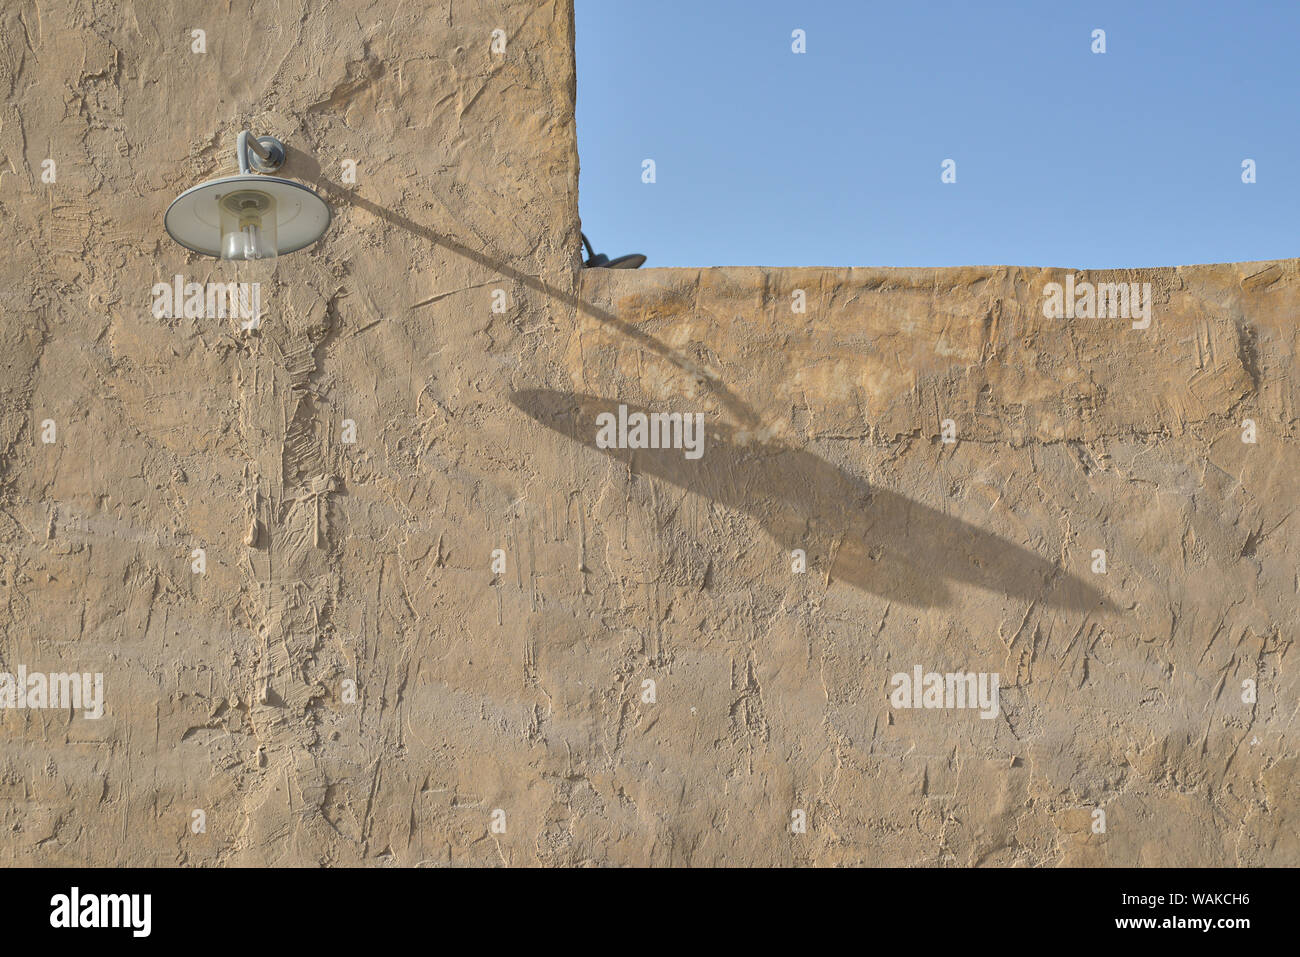 Vintage lighting fixture casting a shadow, taken in the afternoon with traditional house wall in the foreground, Souq Wakrah, Qatar Stock Photo